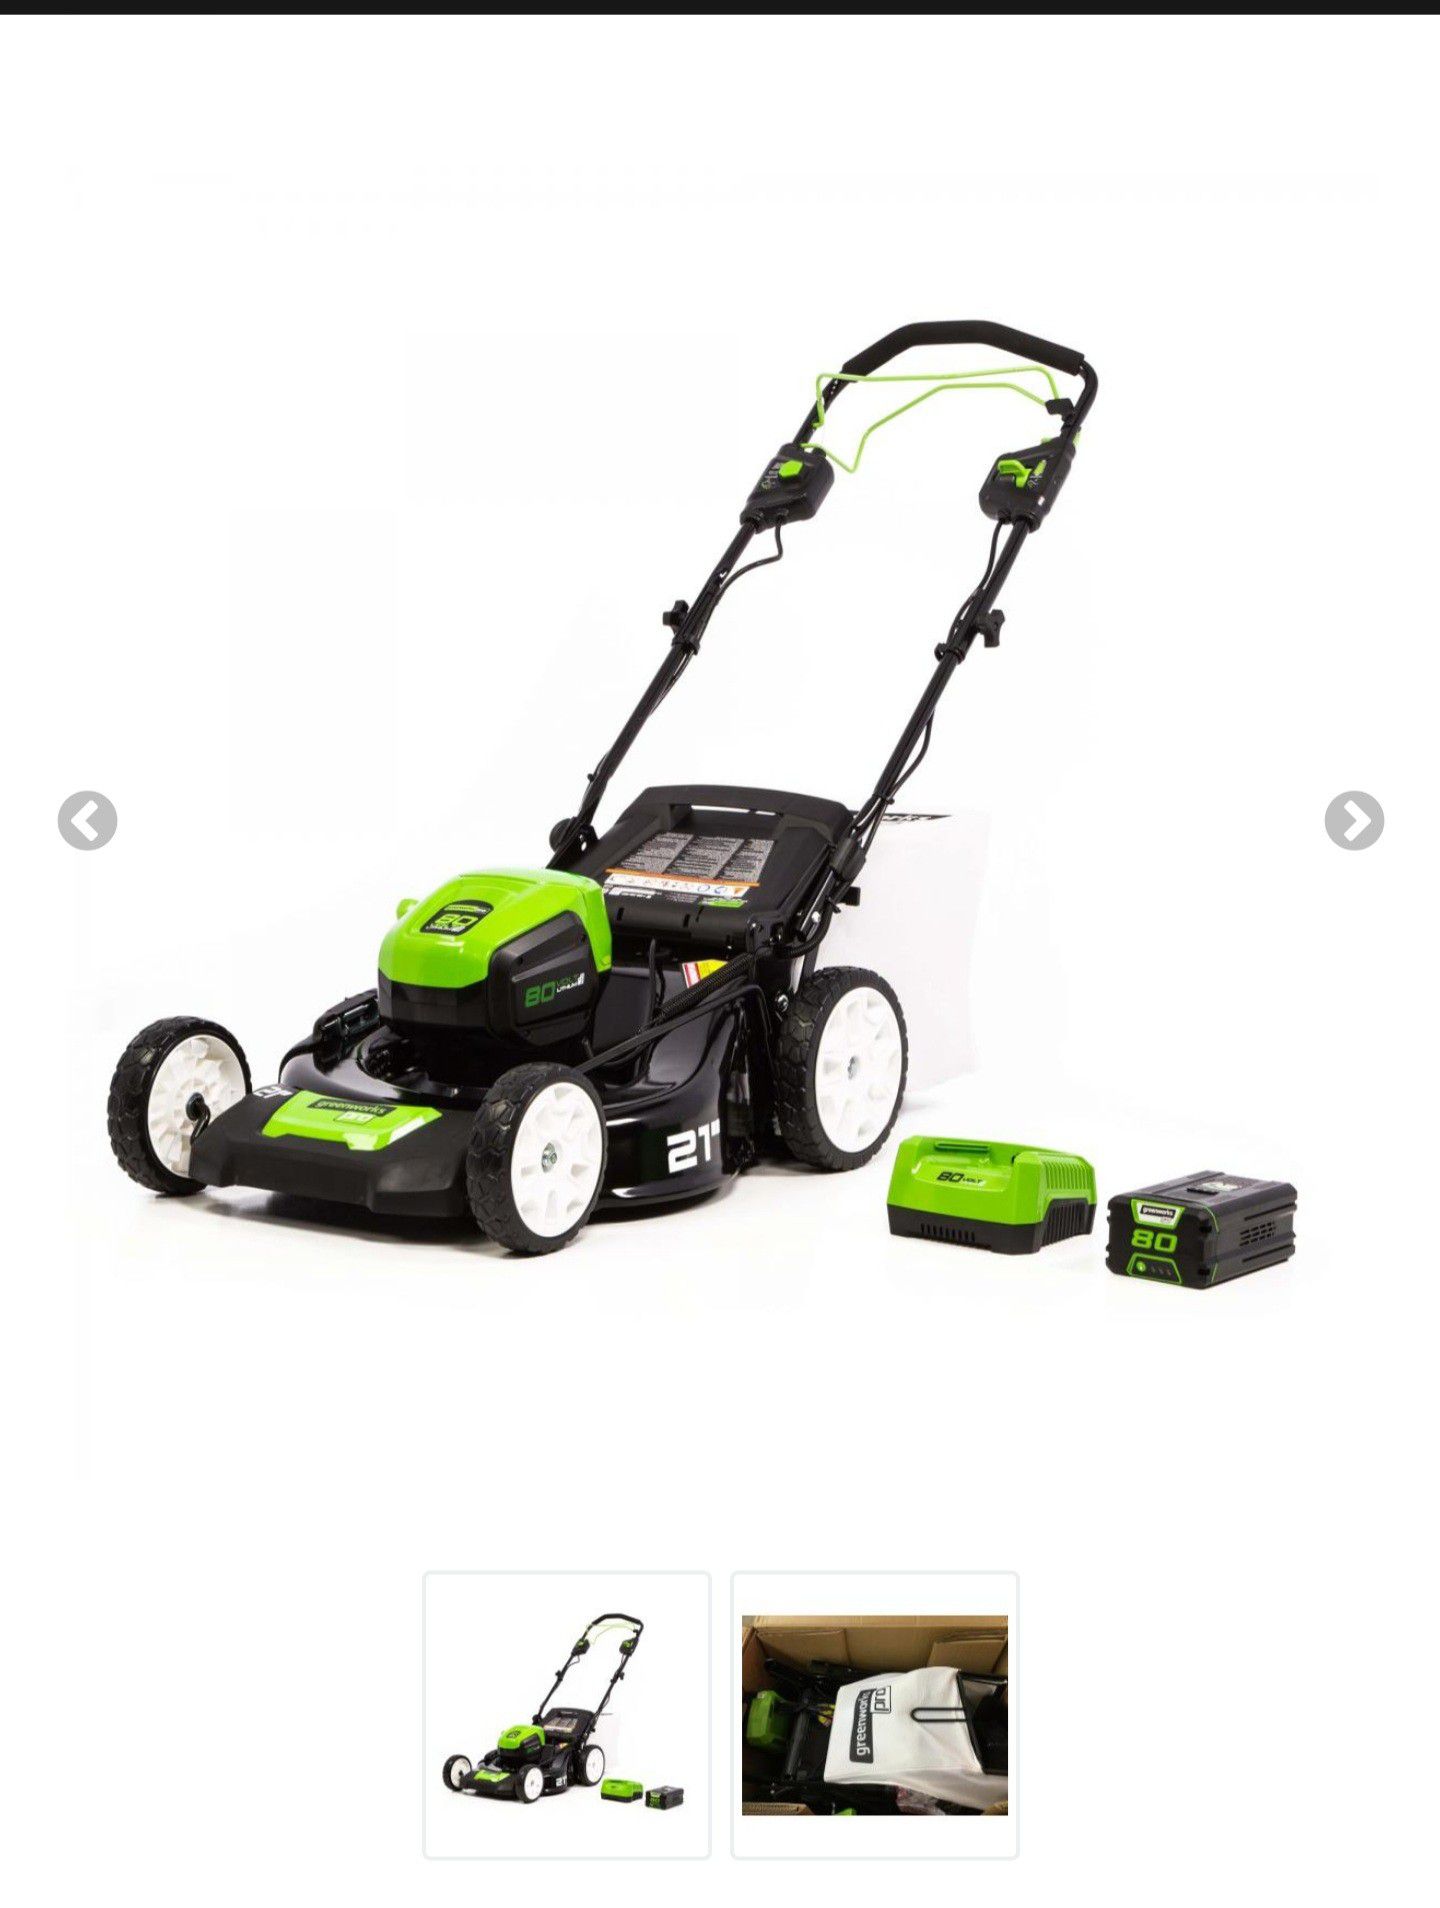 Greenworks Pro 80V 21-Inch Self-Propelled Cordless Lawn Mower, 5Ah Battery and Charger Included